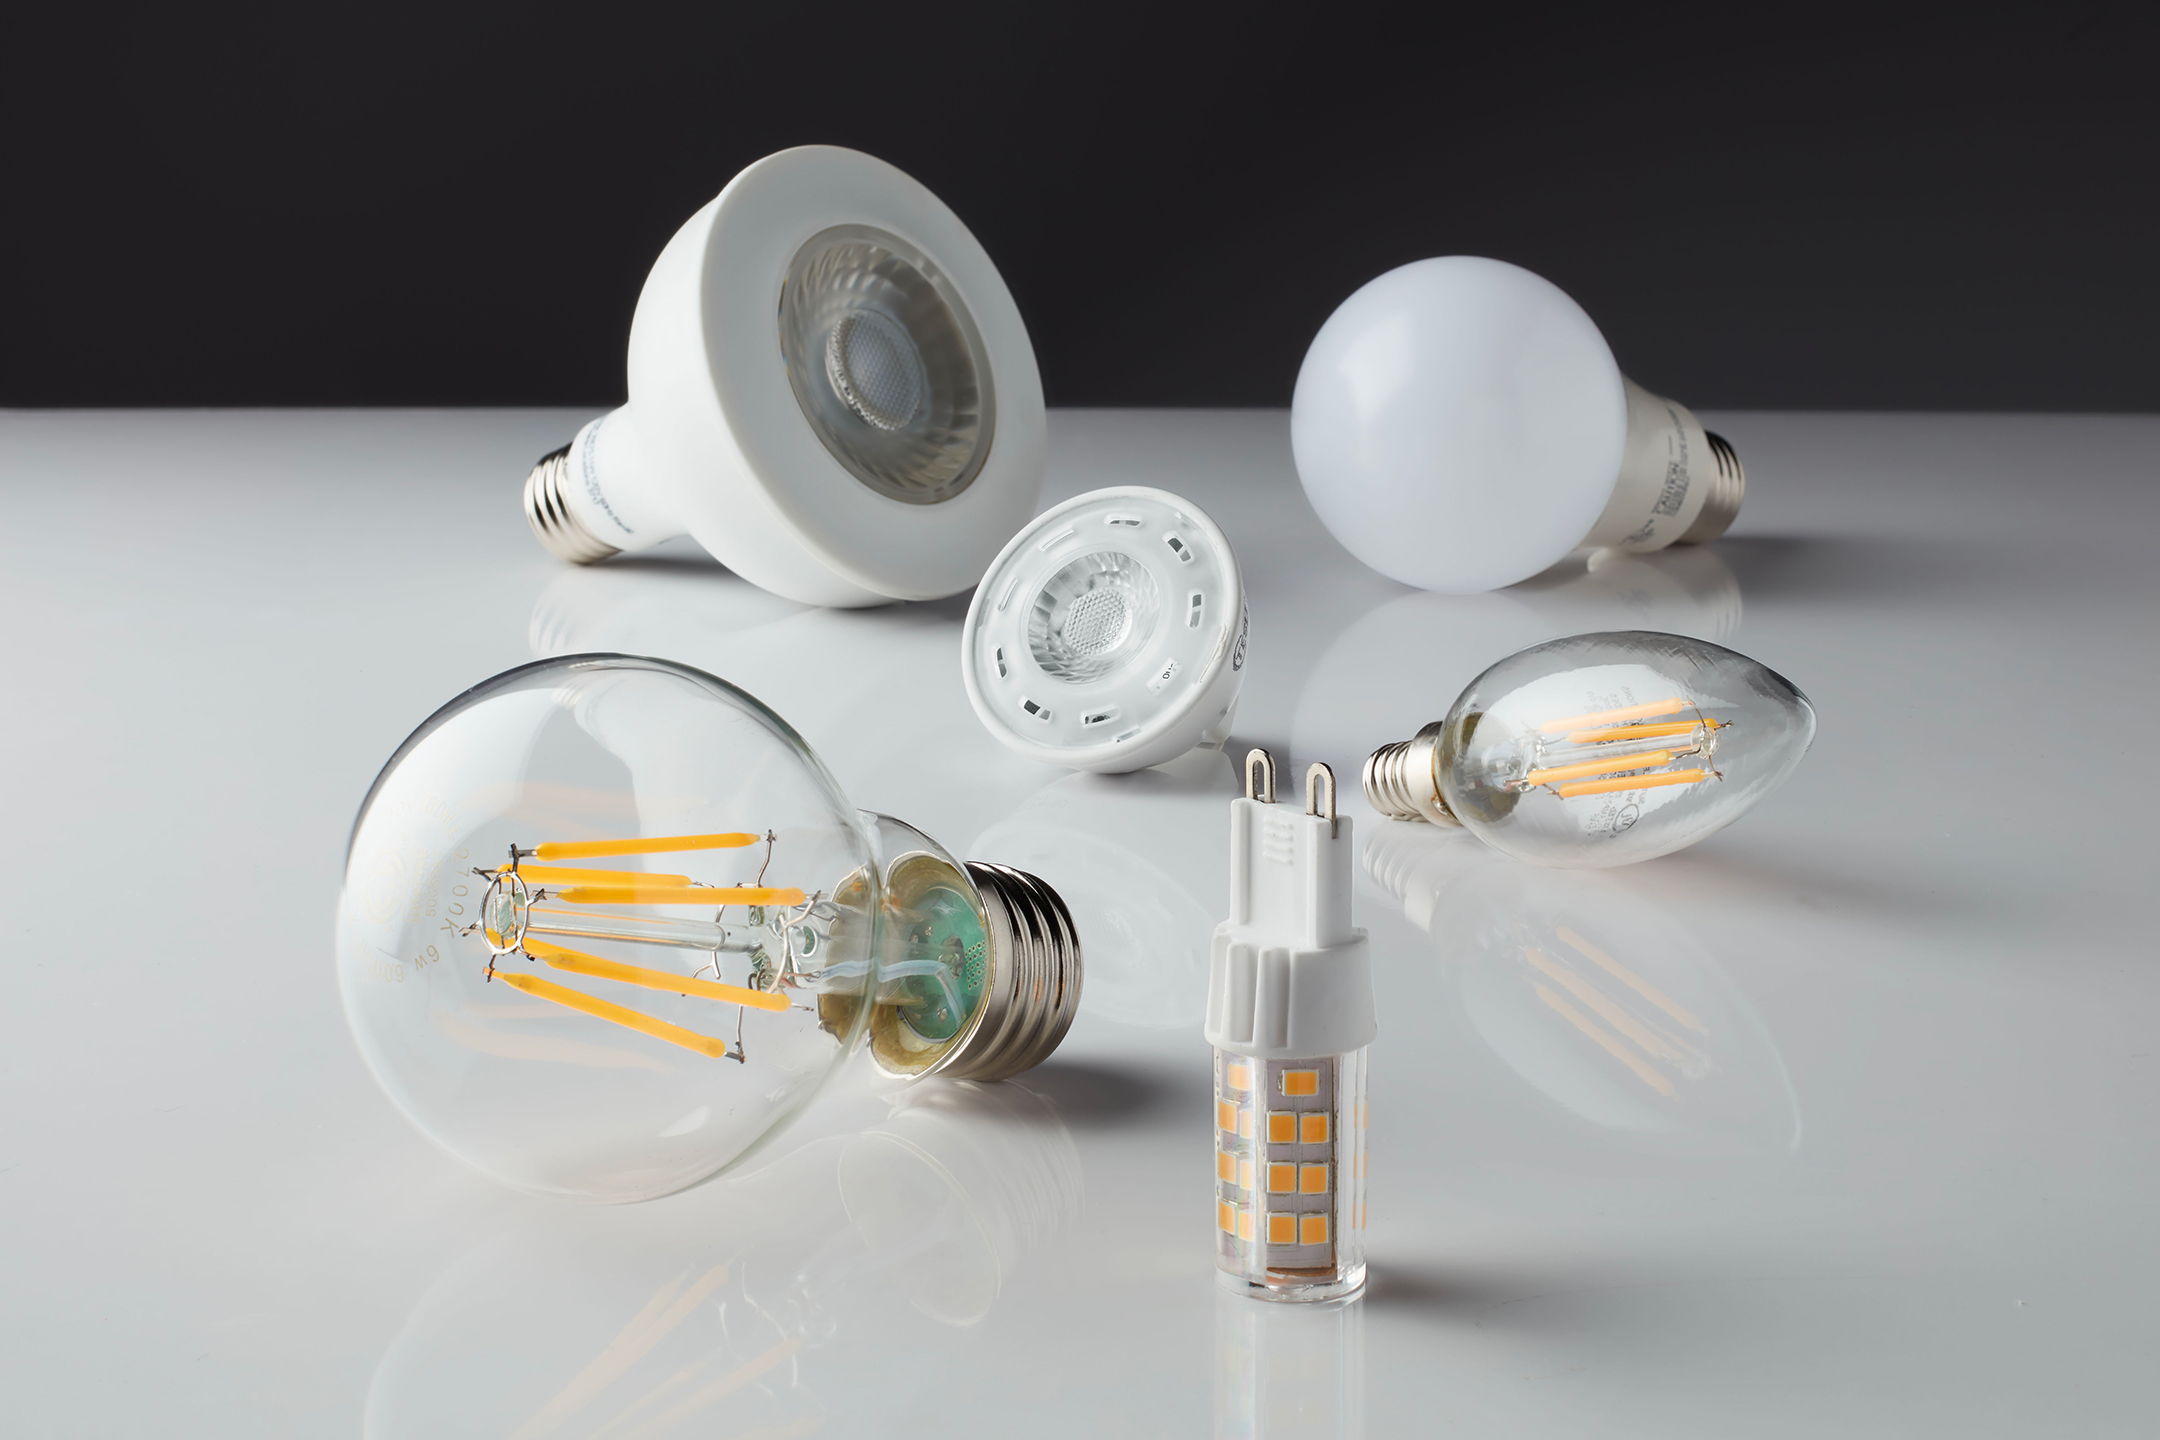 The Most Common Light Bulb Questions A, Do You Need Special Light Bulbs For Ceiling Fans